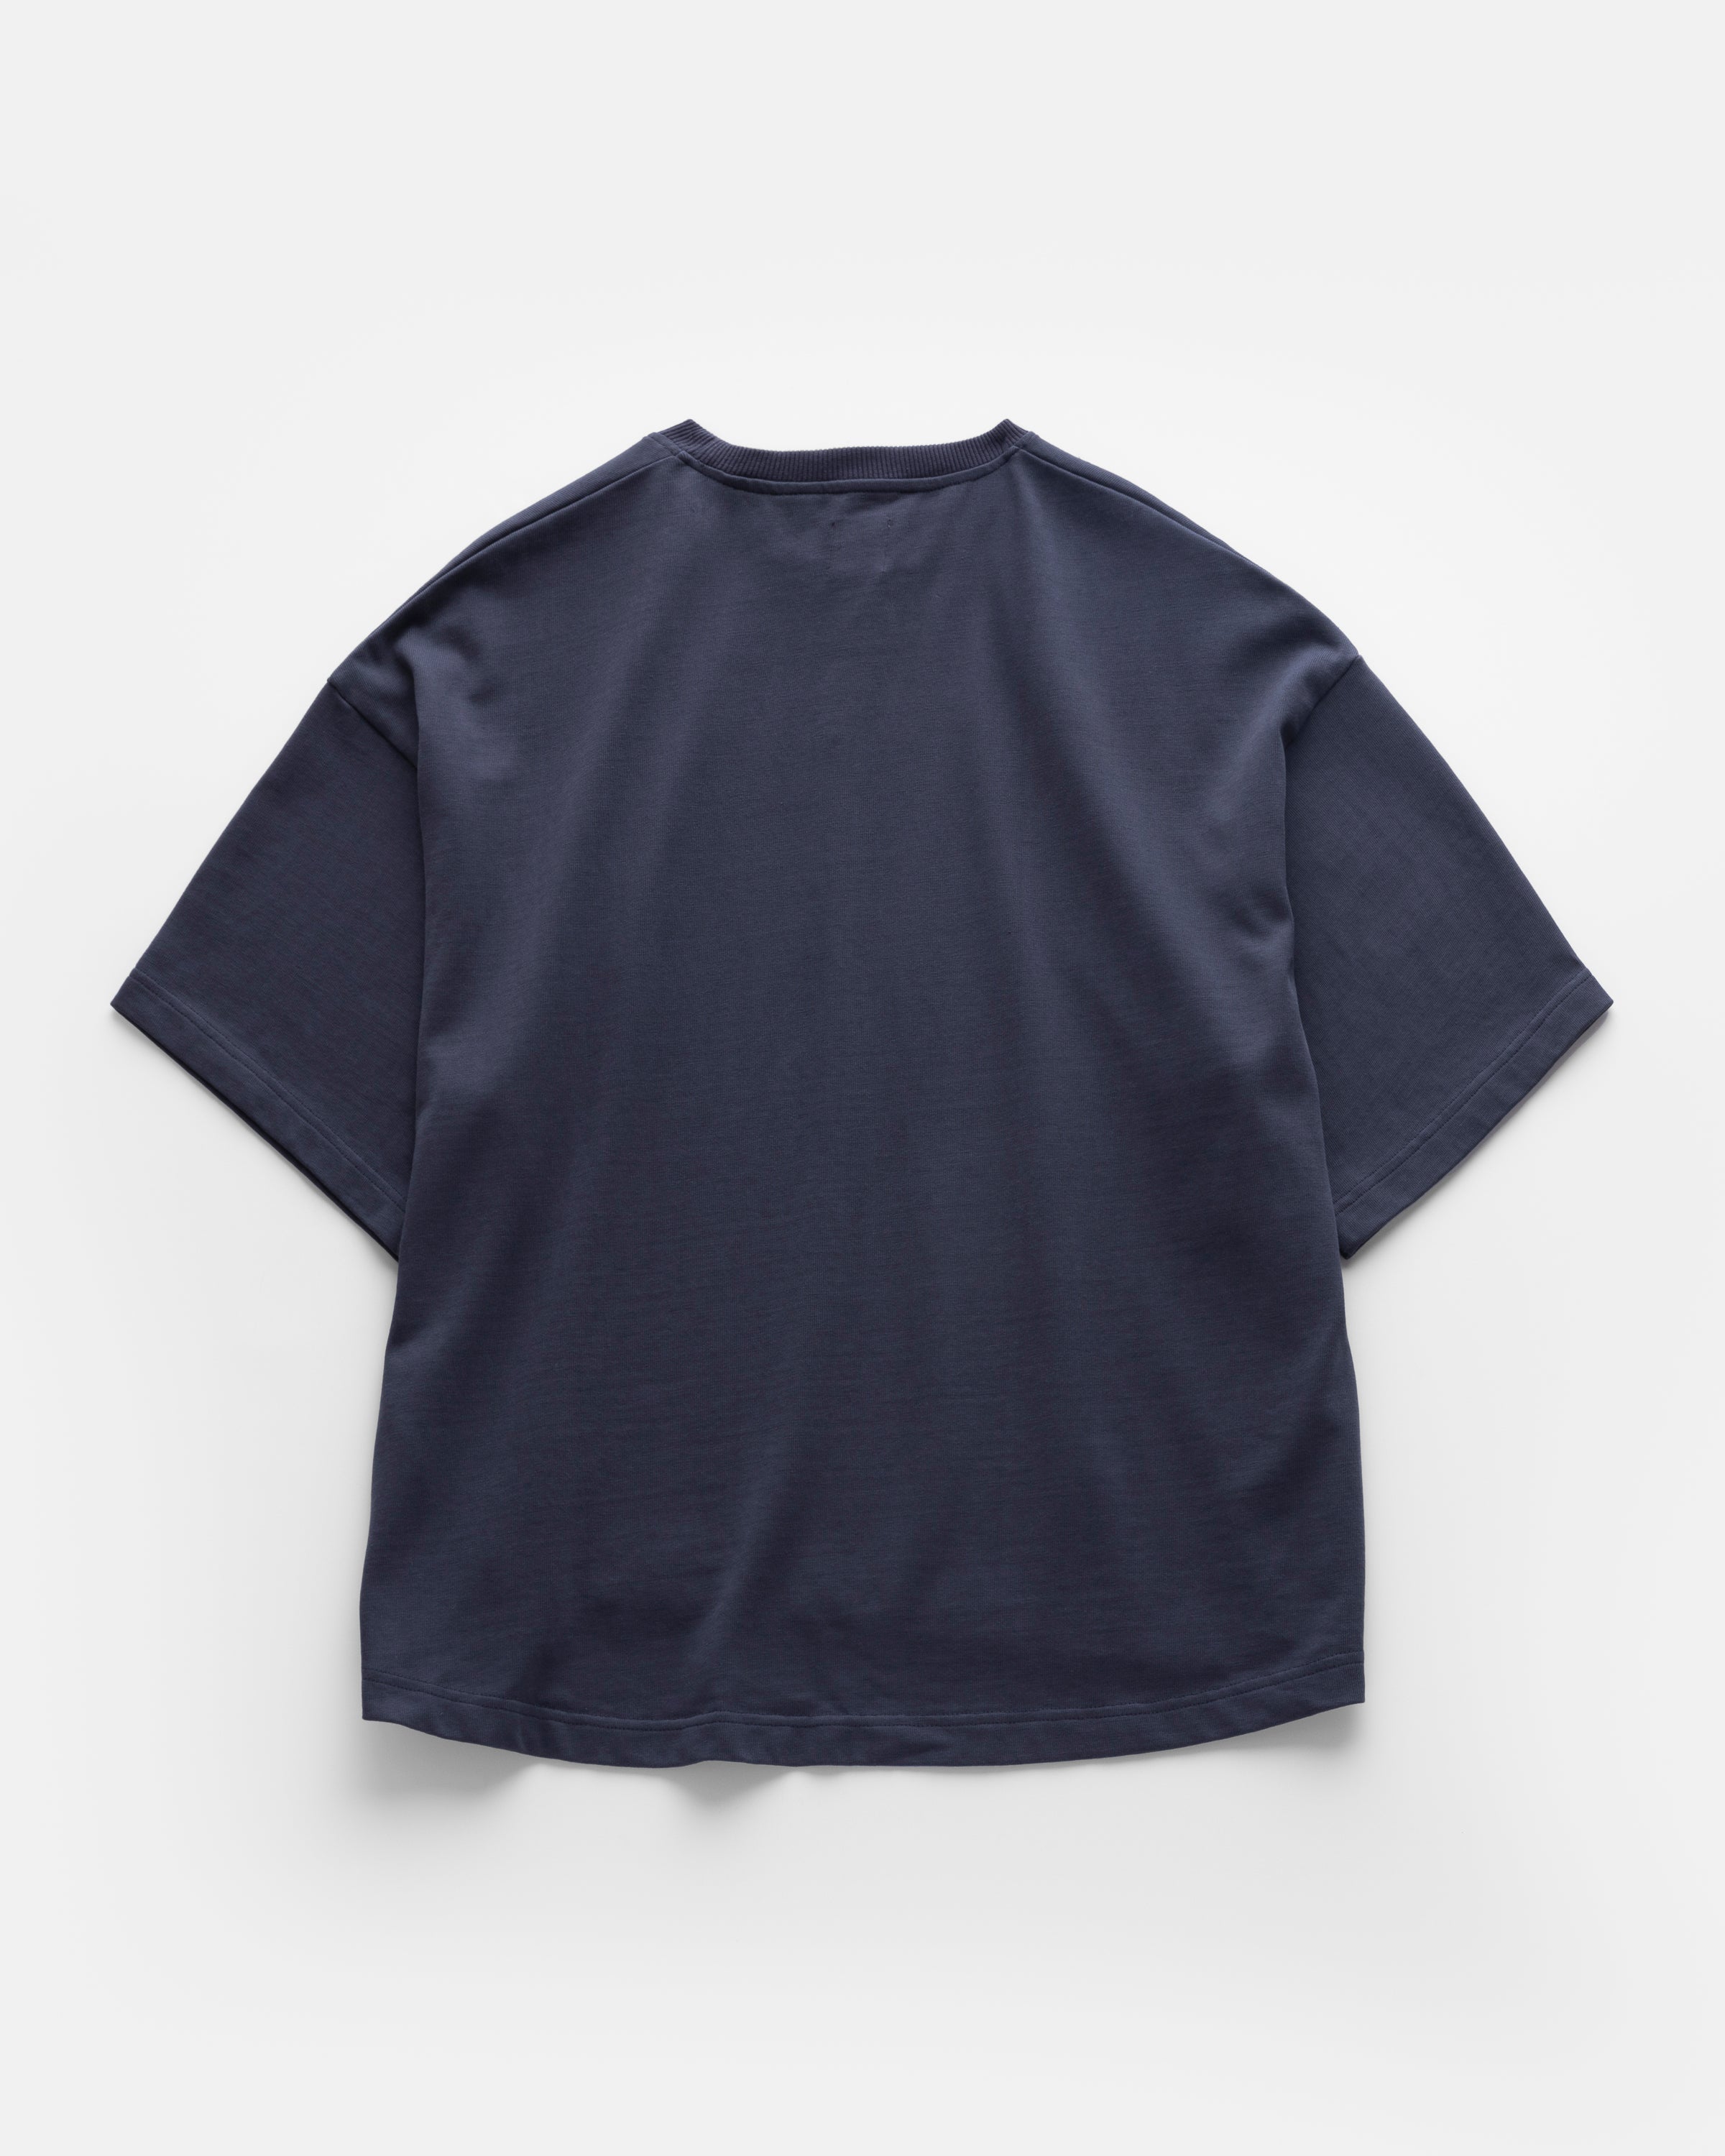 GRAHAME BIG TEE - WASHED NAVY HEAVYWEIGHT COTTON JERSEY